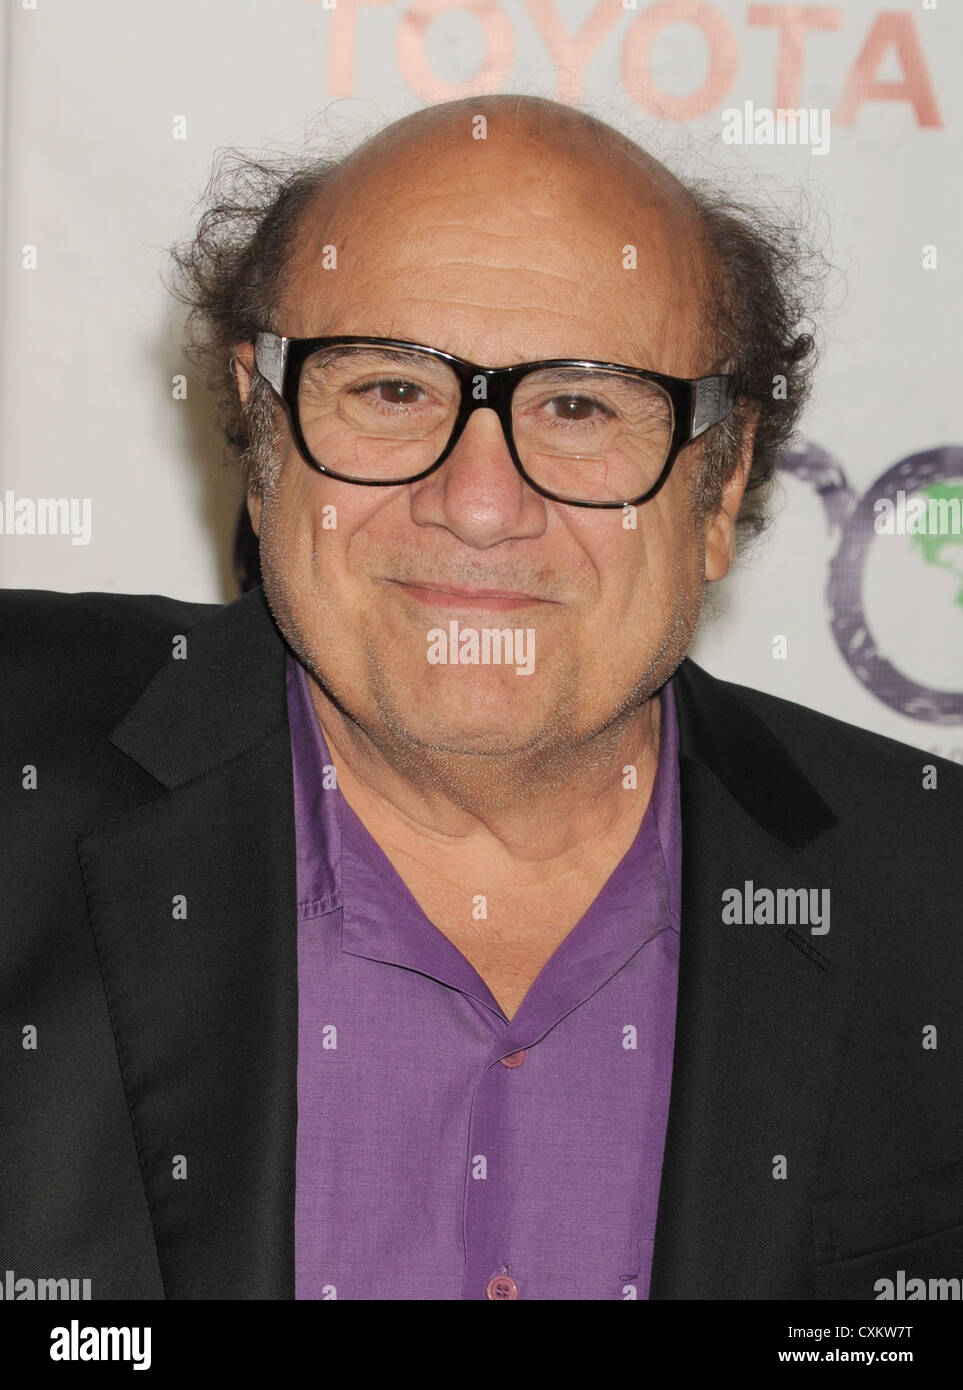 danny devito with hair